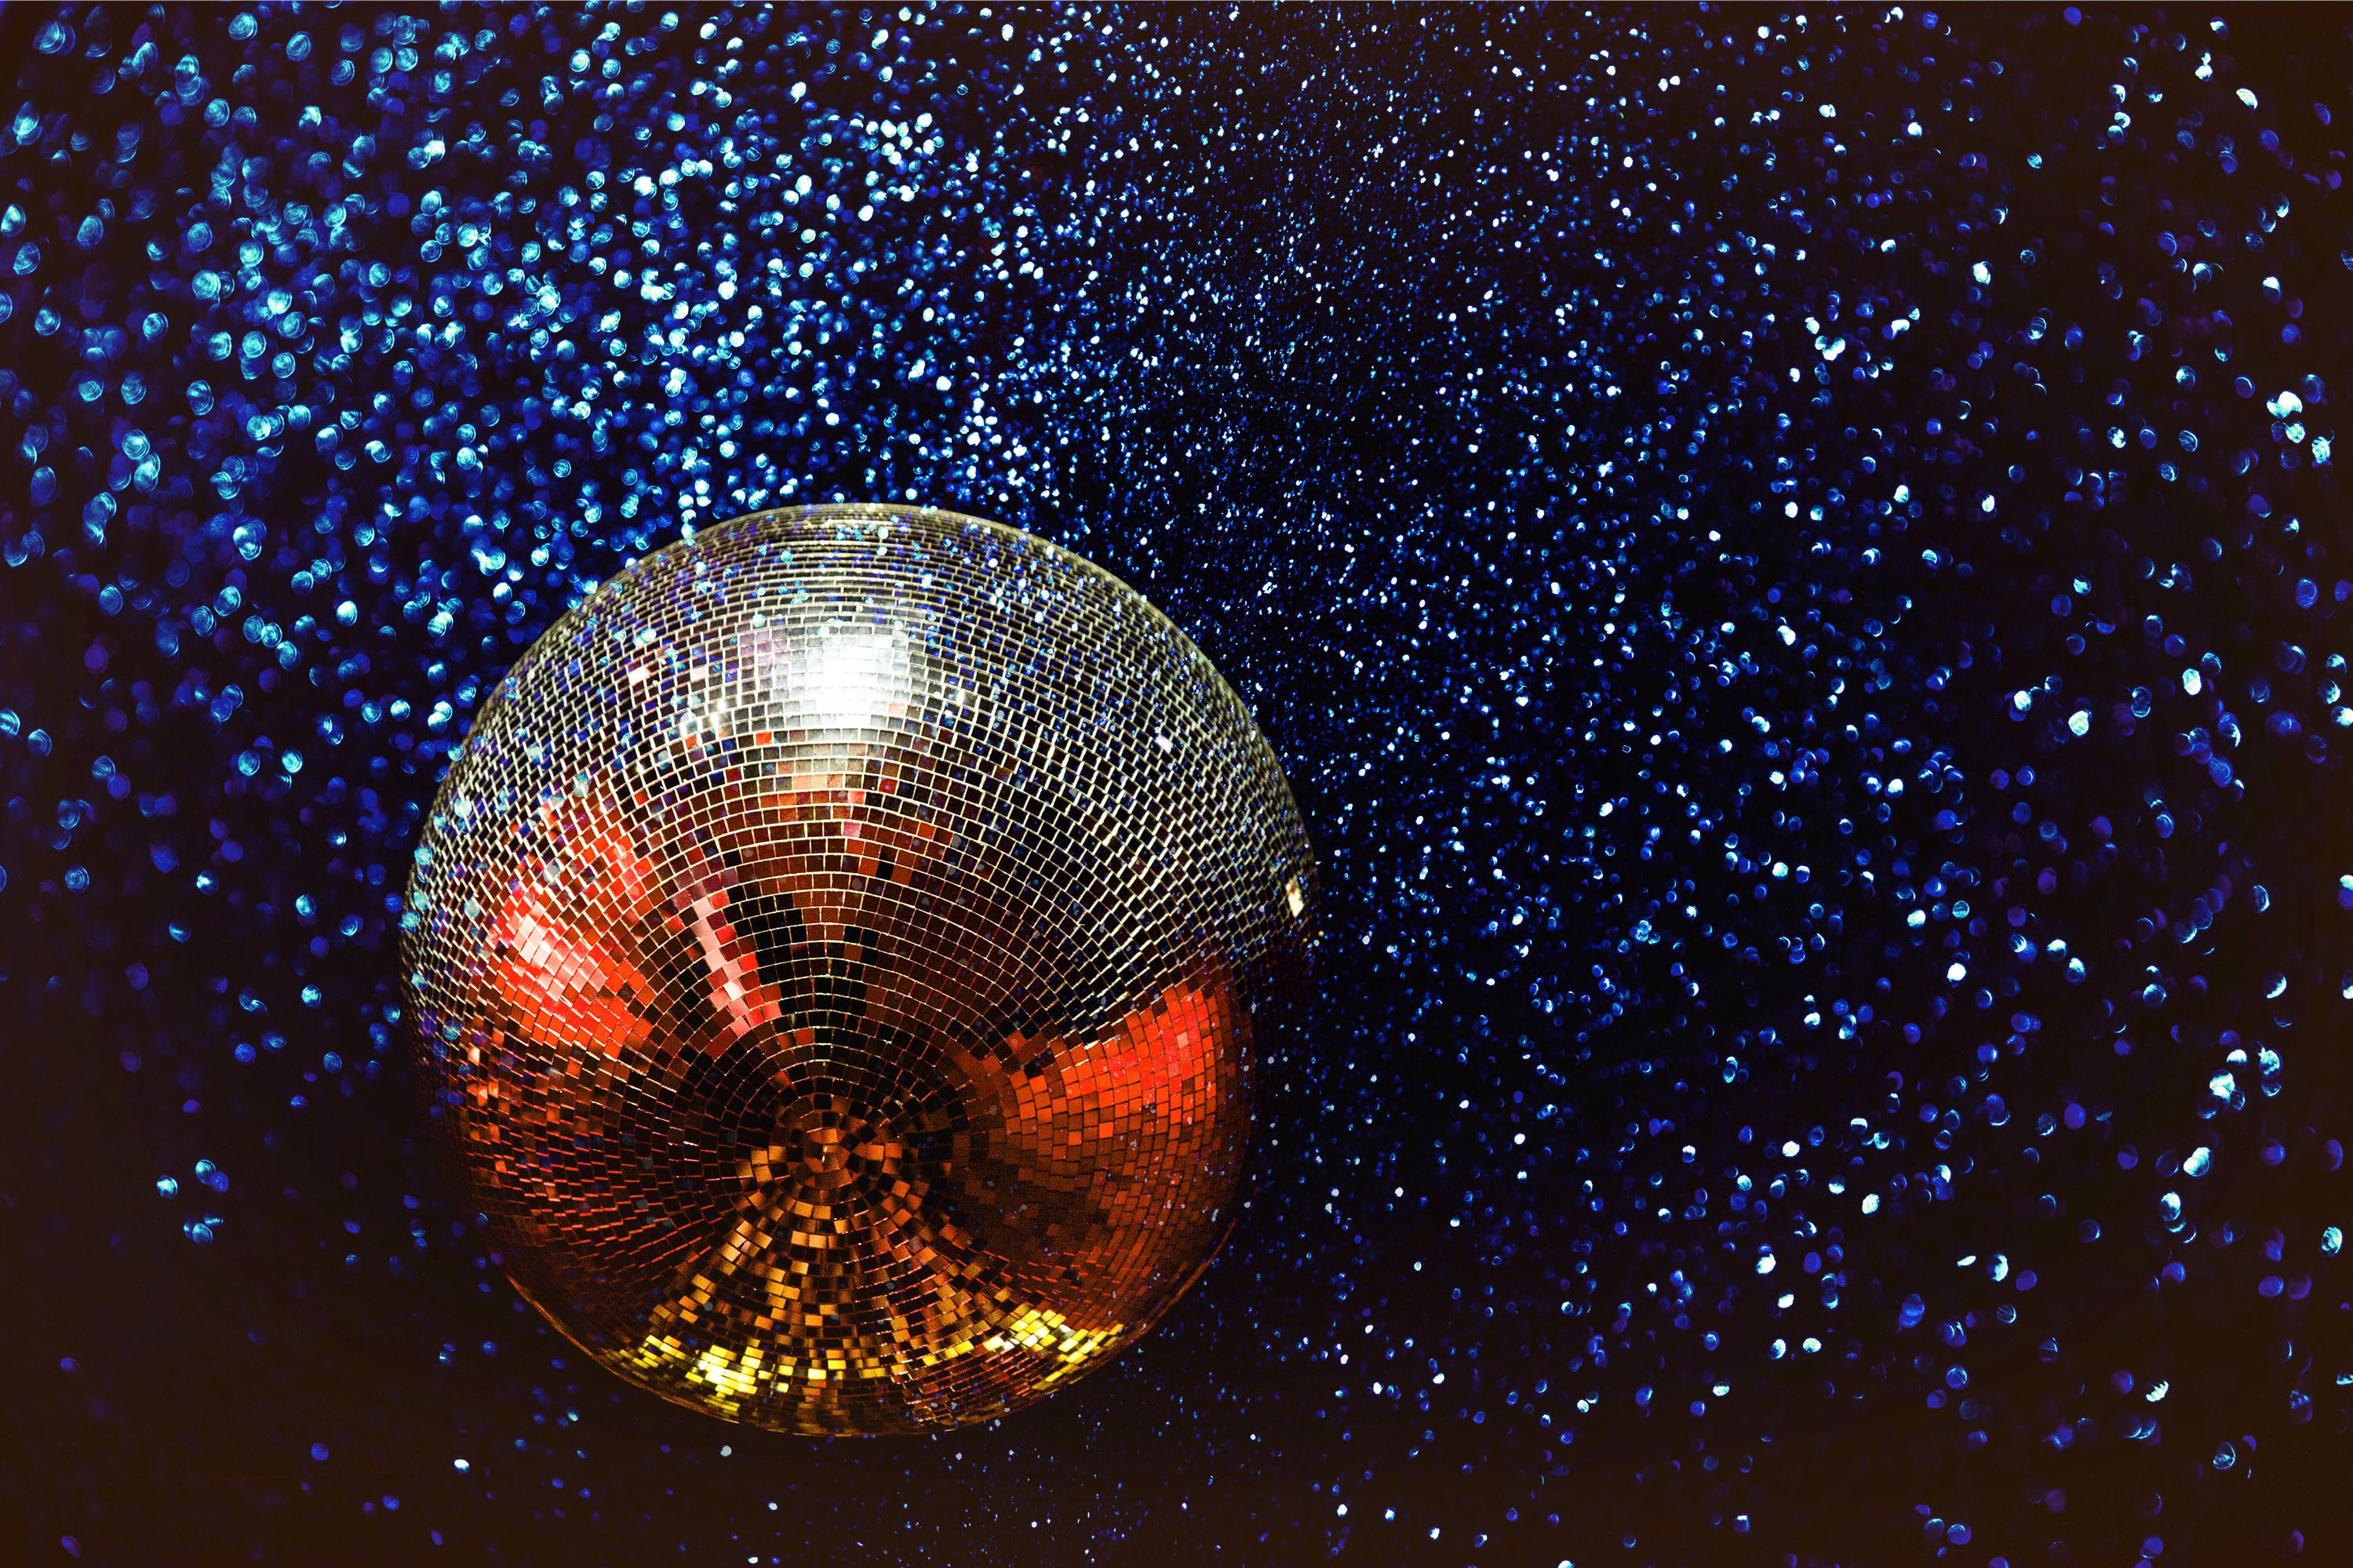 Disco ball on a dark background with light dots